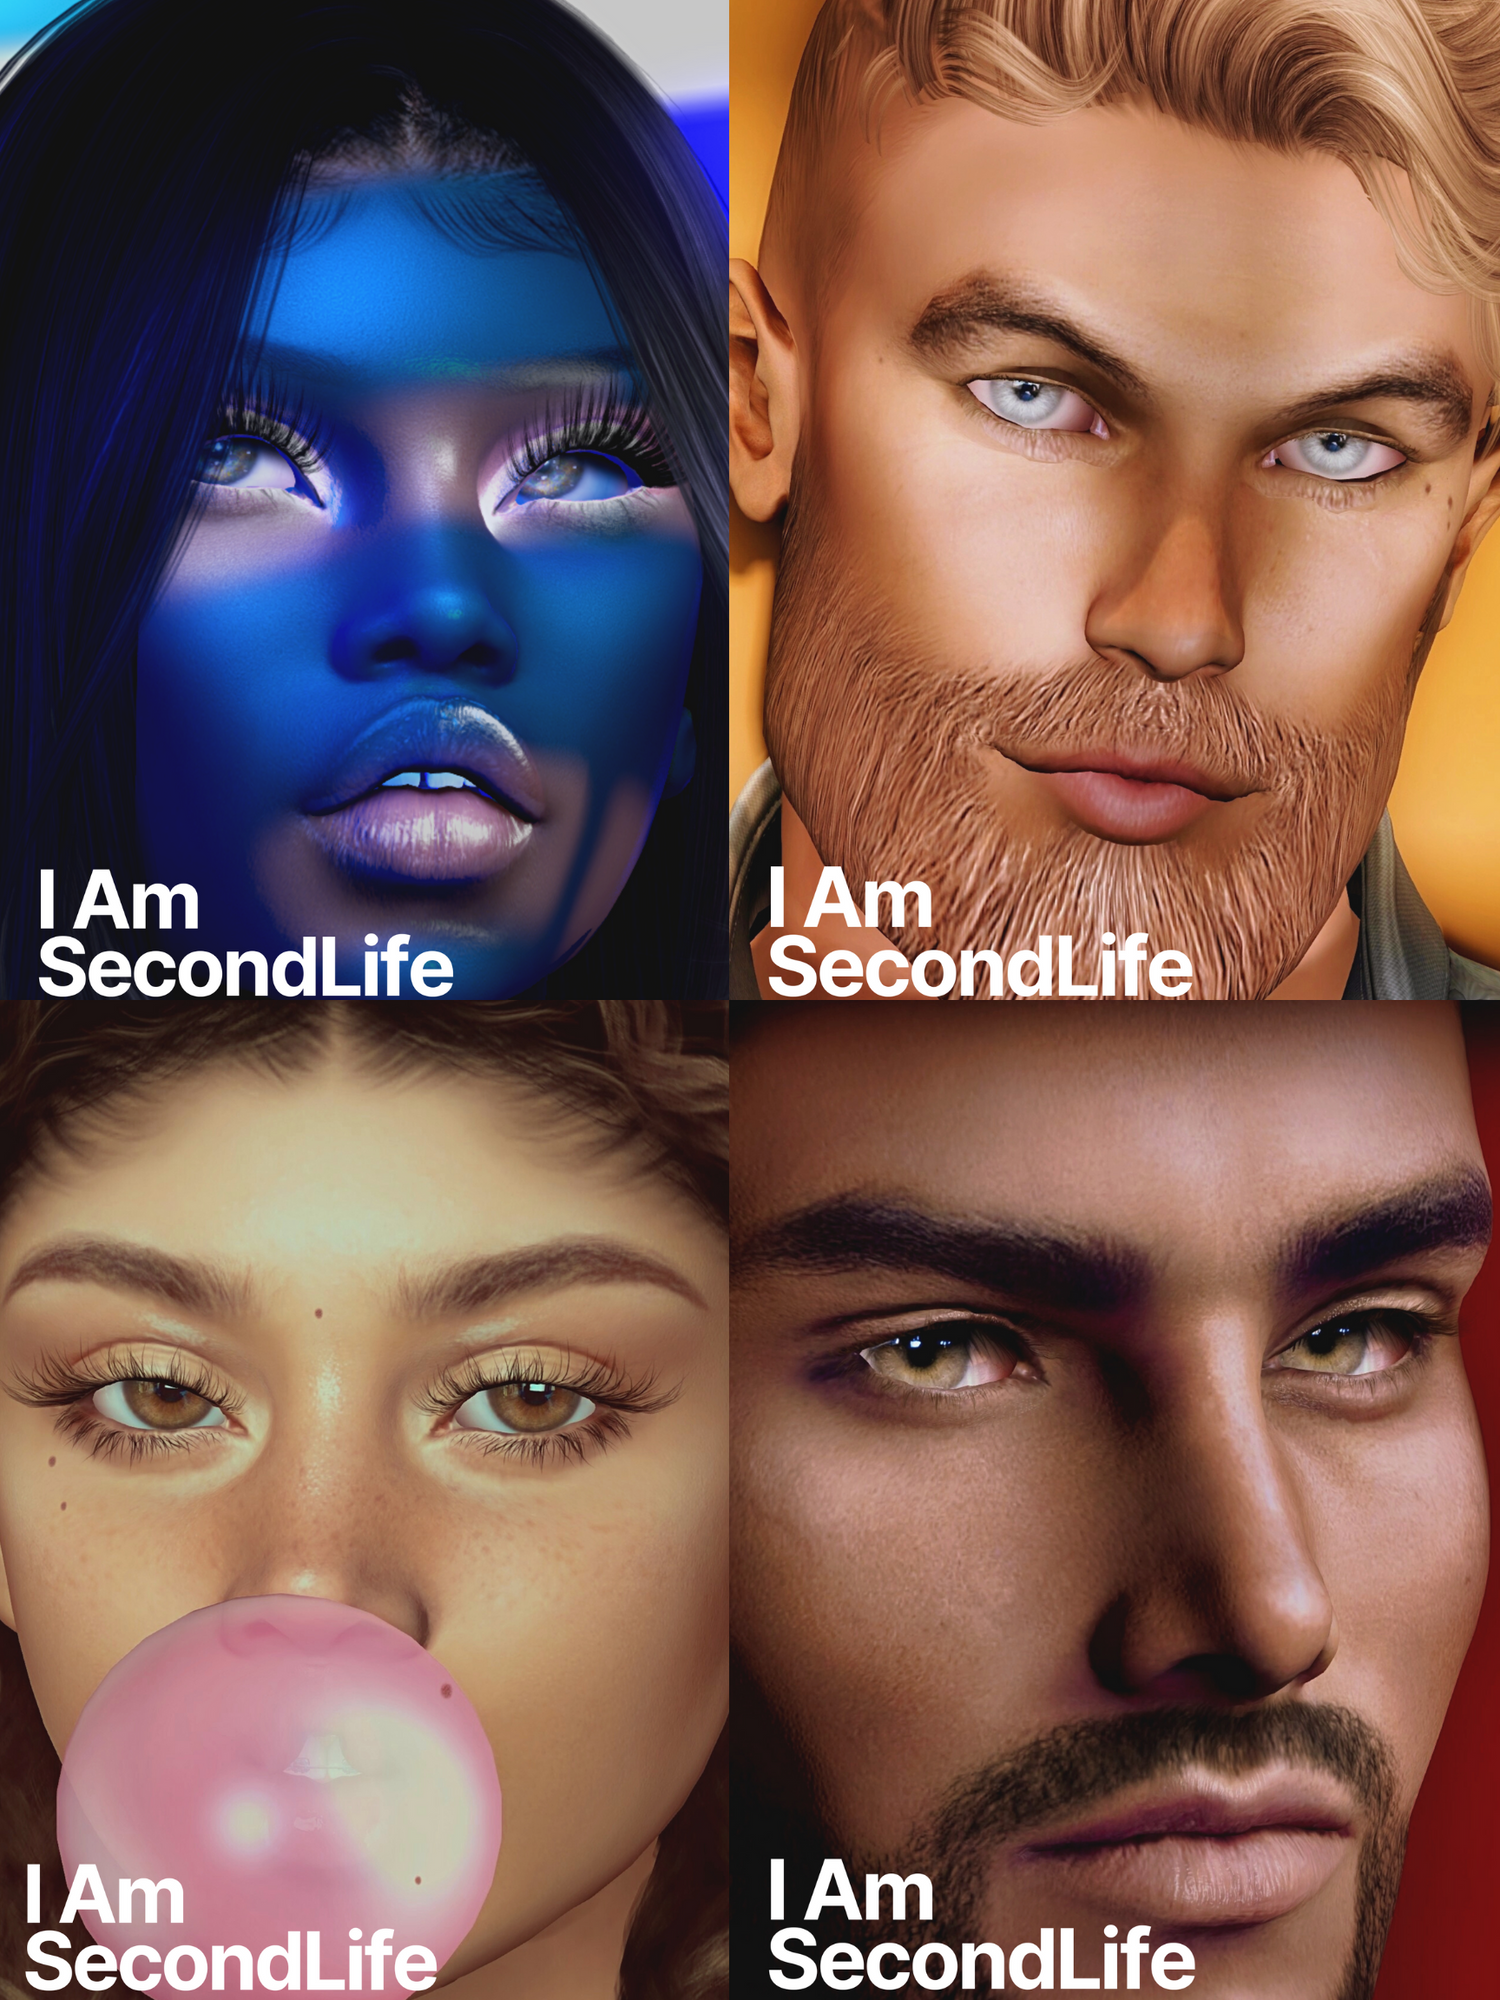 Exhibition: I Am Second Life